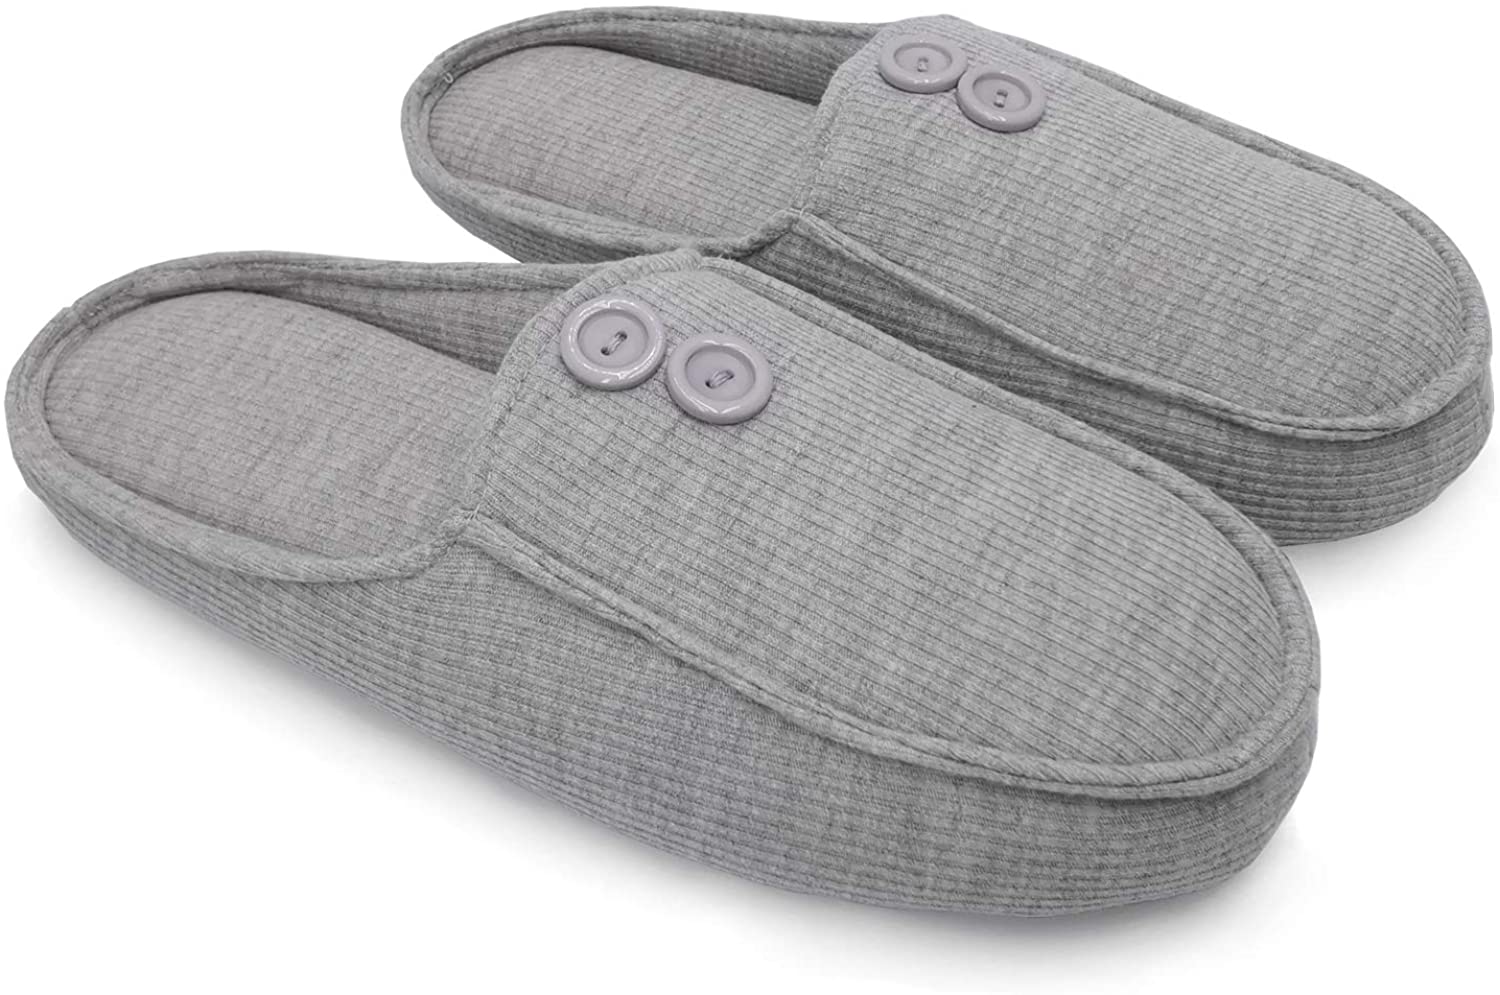 Mens & Womens Cotton Knit Memory Foam Slippers Light Weight House Shoes with Anti-Skid Sole